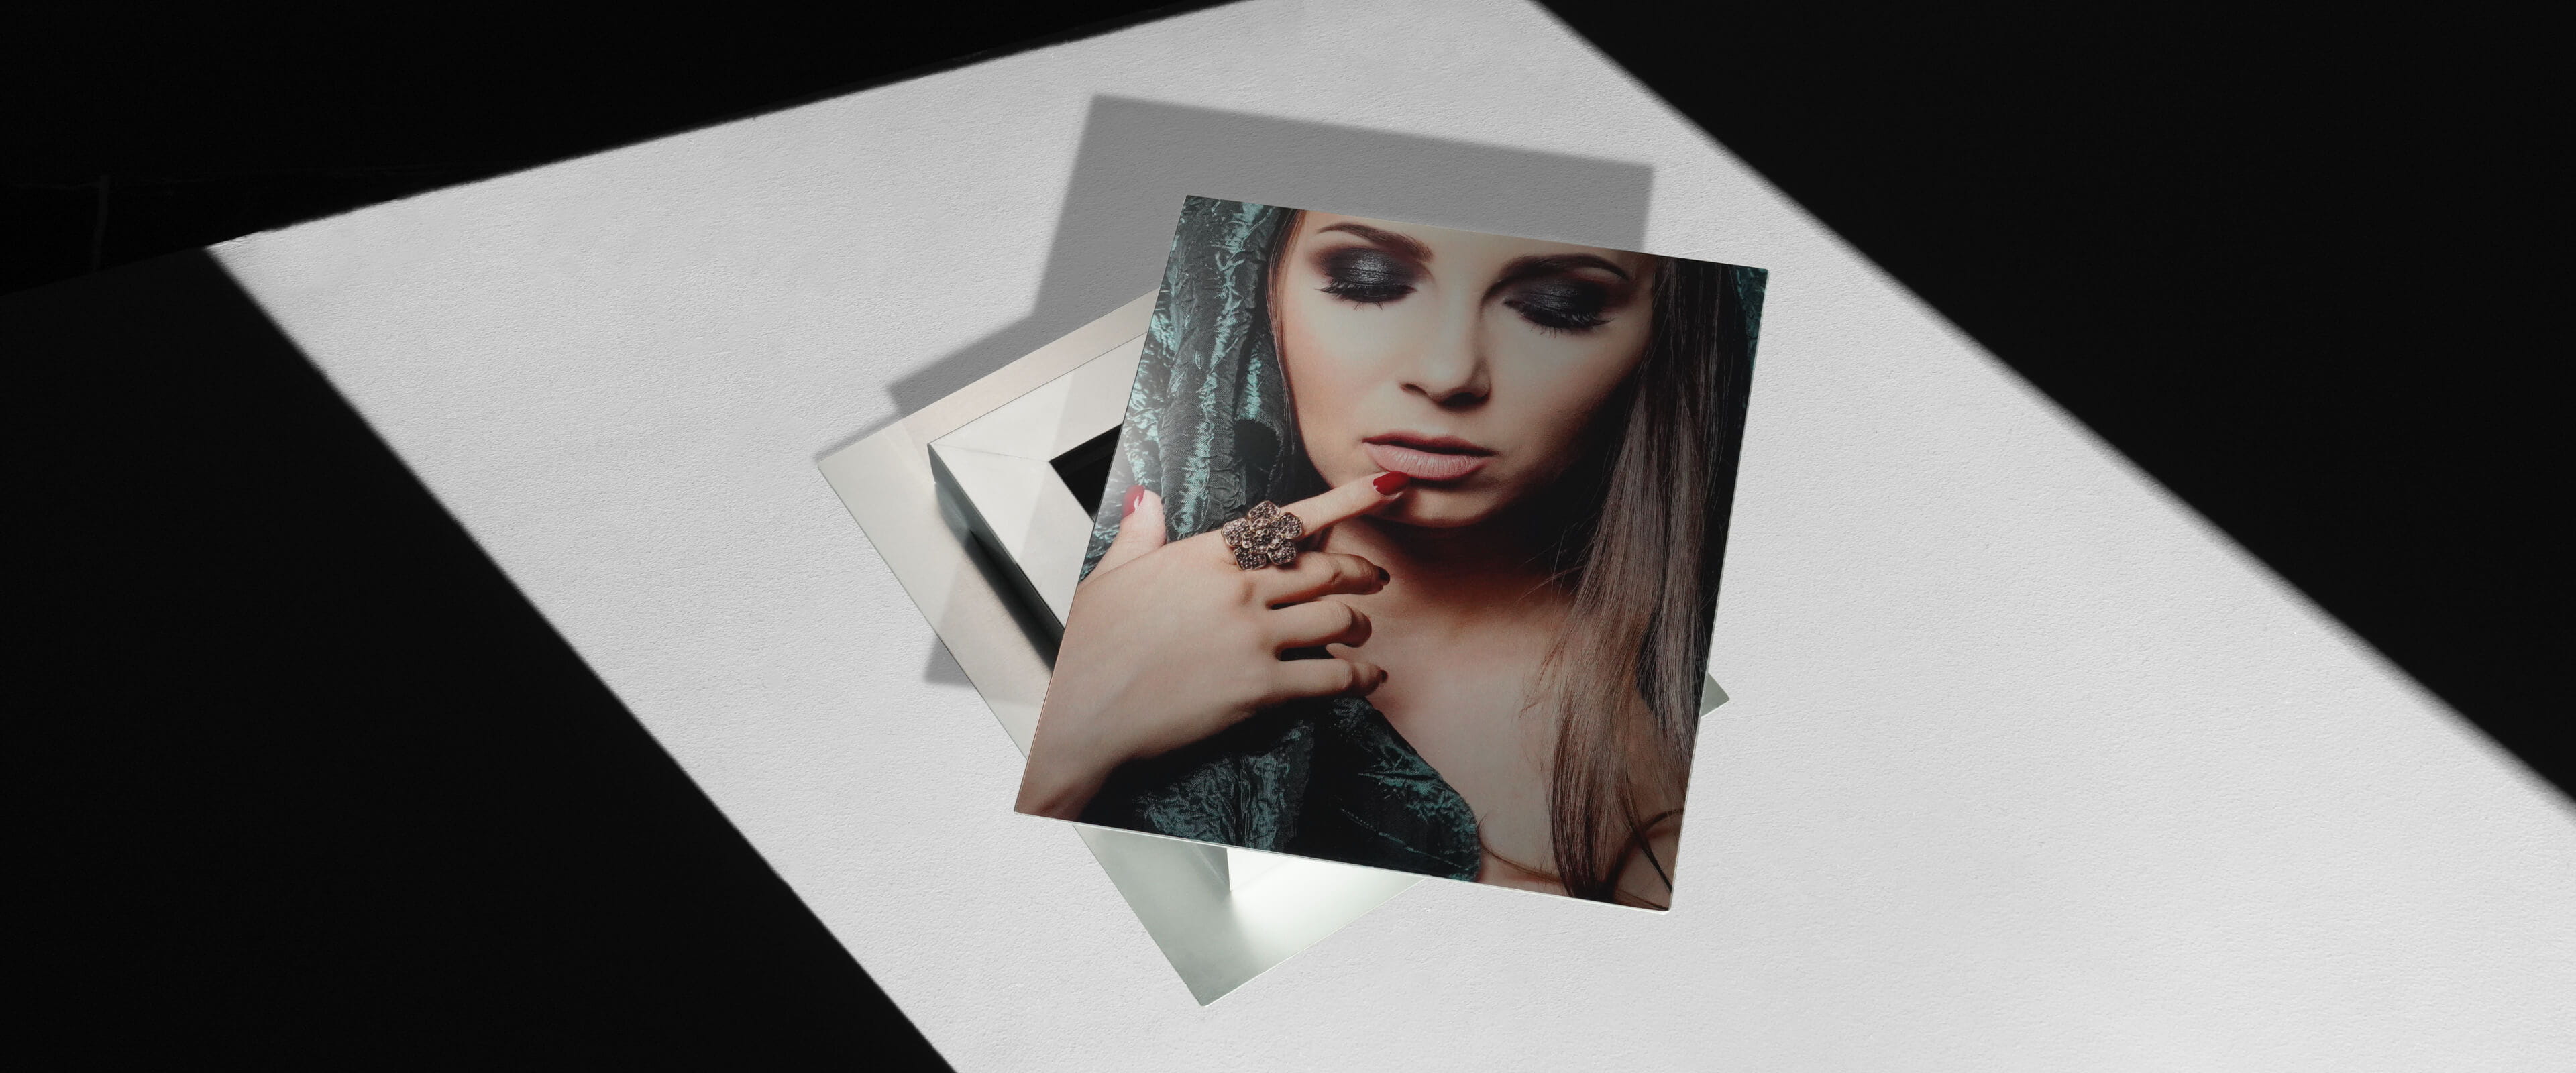 metal print stacked on top of another metal print showing a woman pointing finger at her face